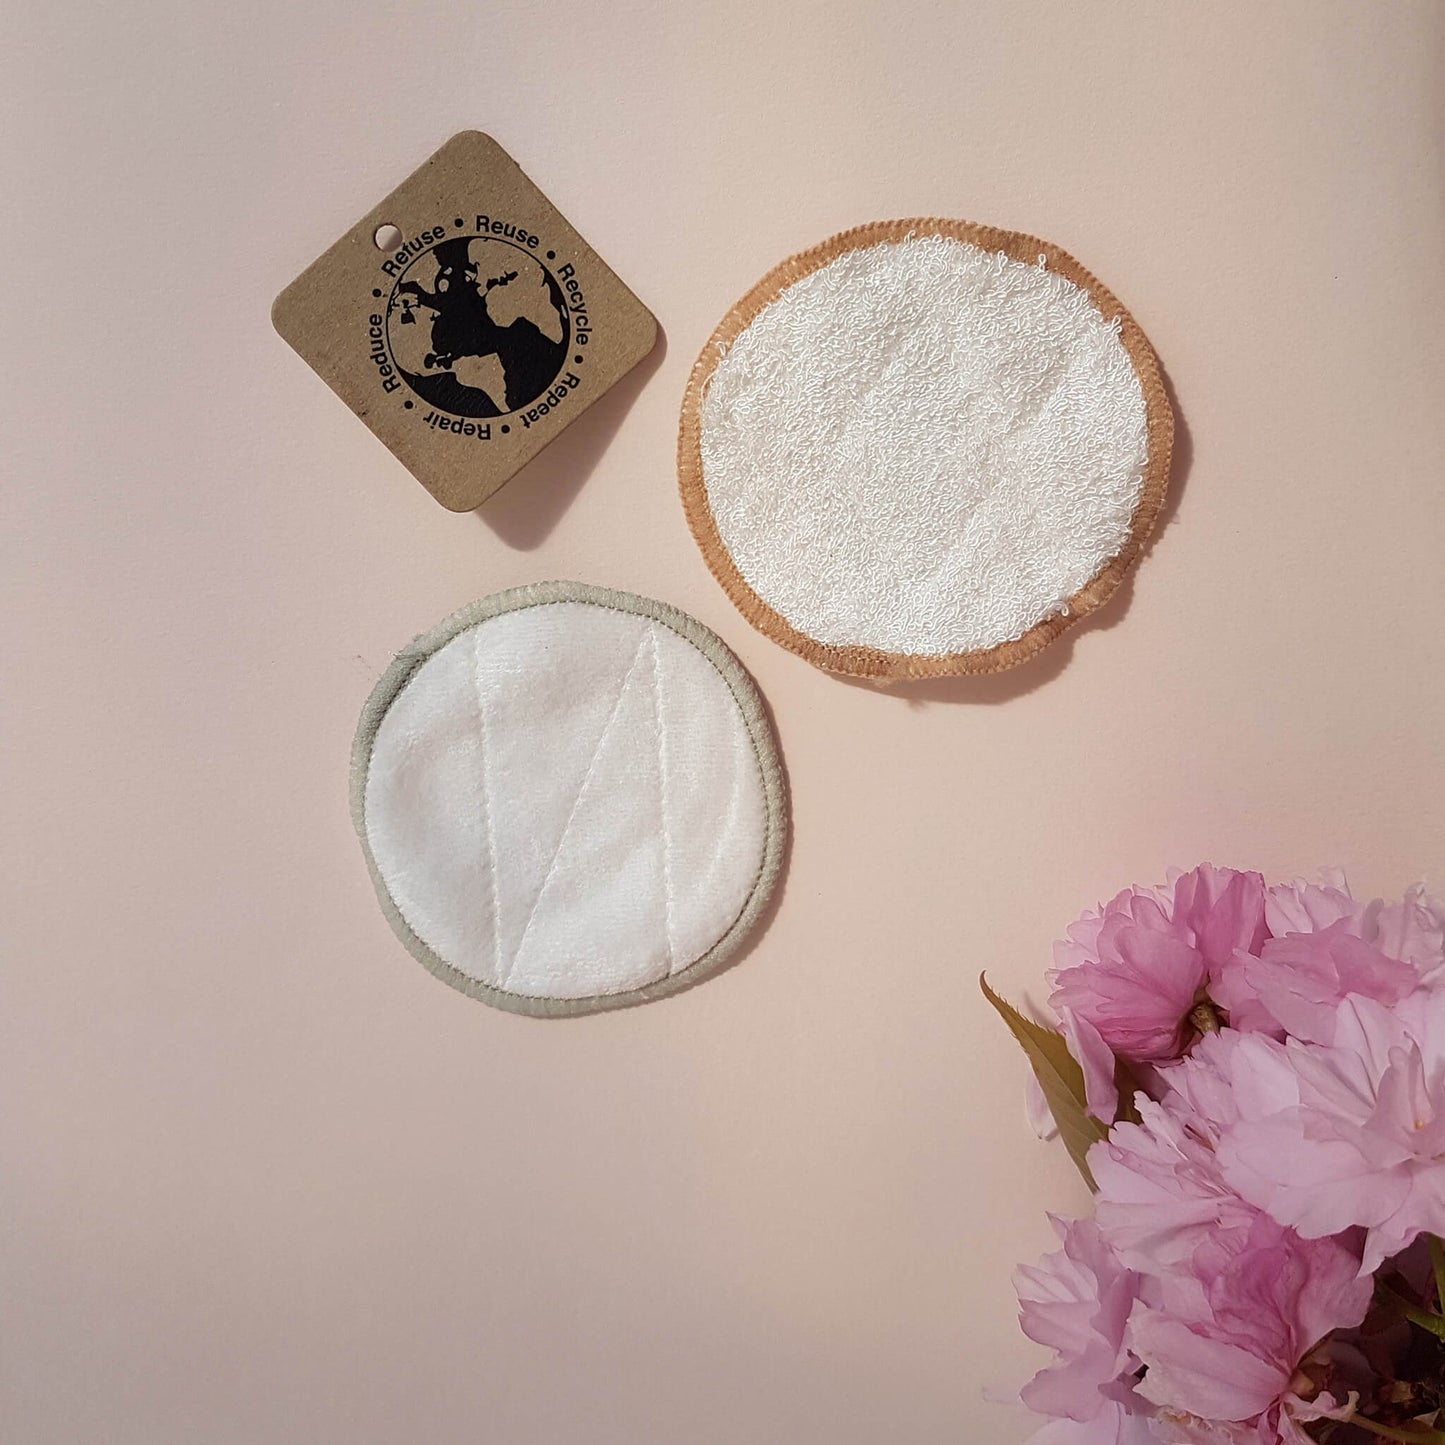 Reusable Makeup Remover Pads - 16 Pack - Unik by Nature